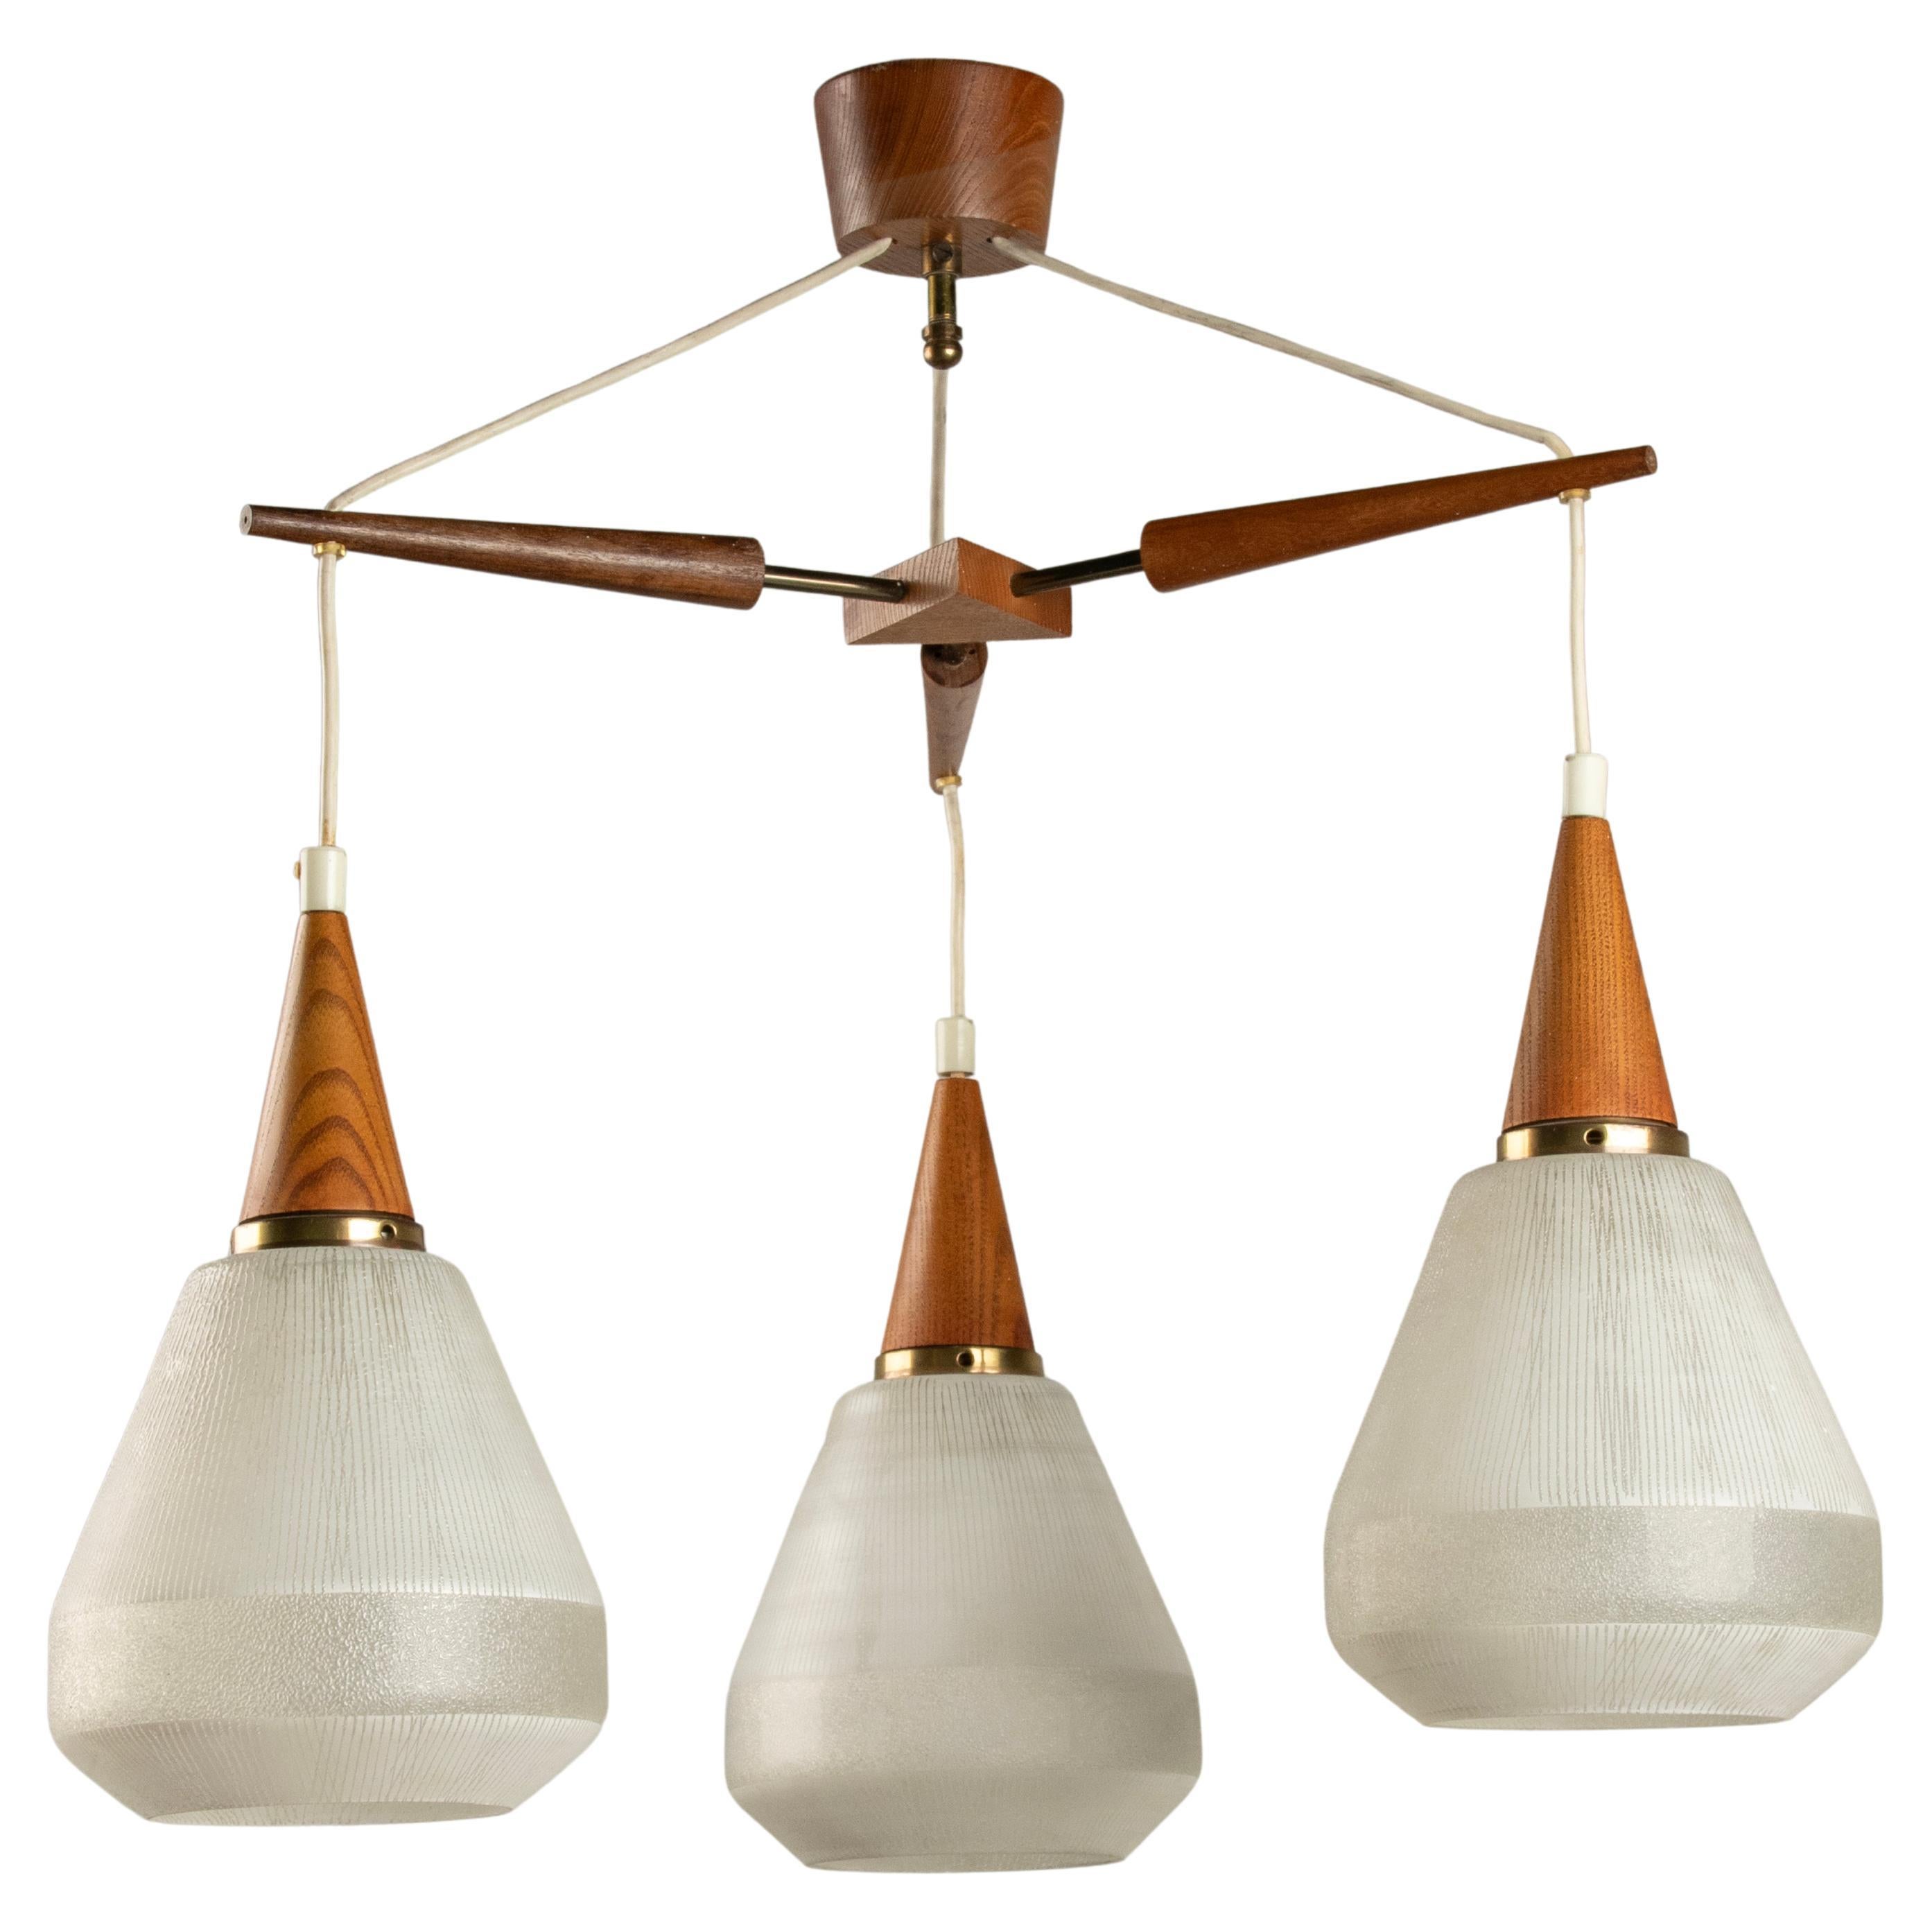 Mid 20th Century Danish Teakwood Pendant Lamp - Frosted Glass Shades